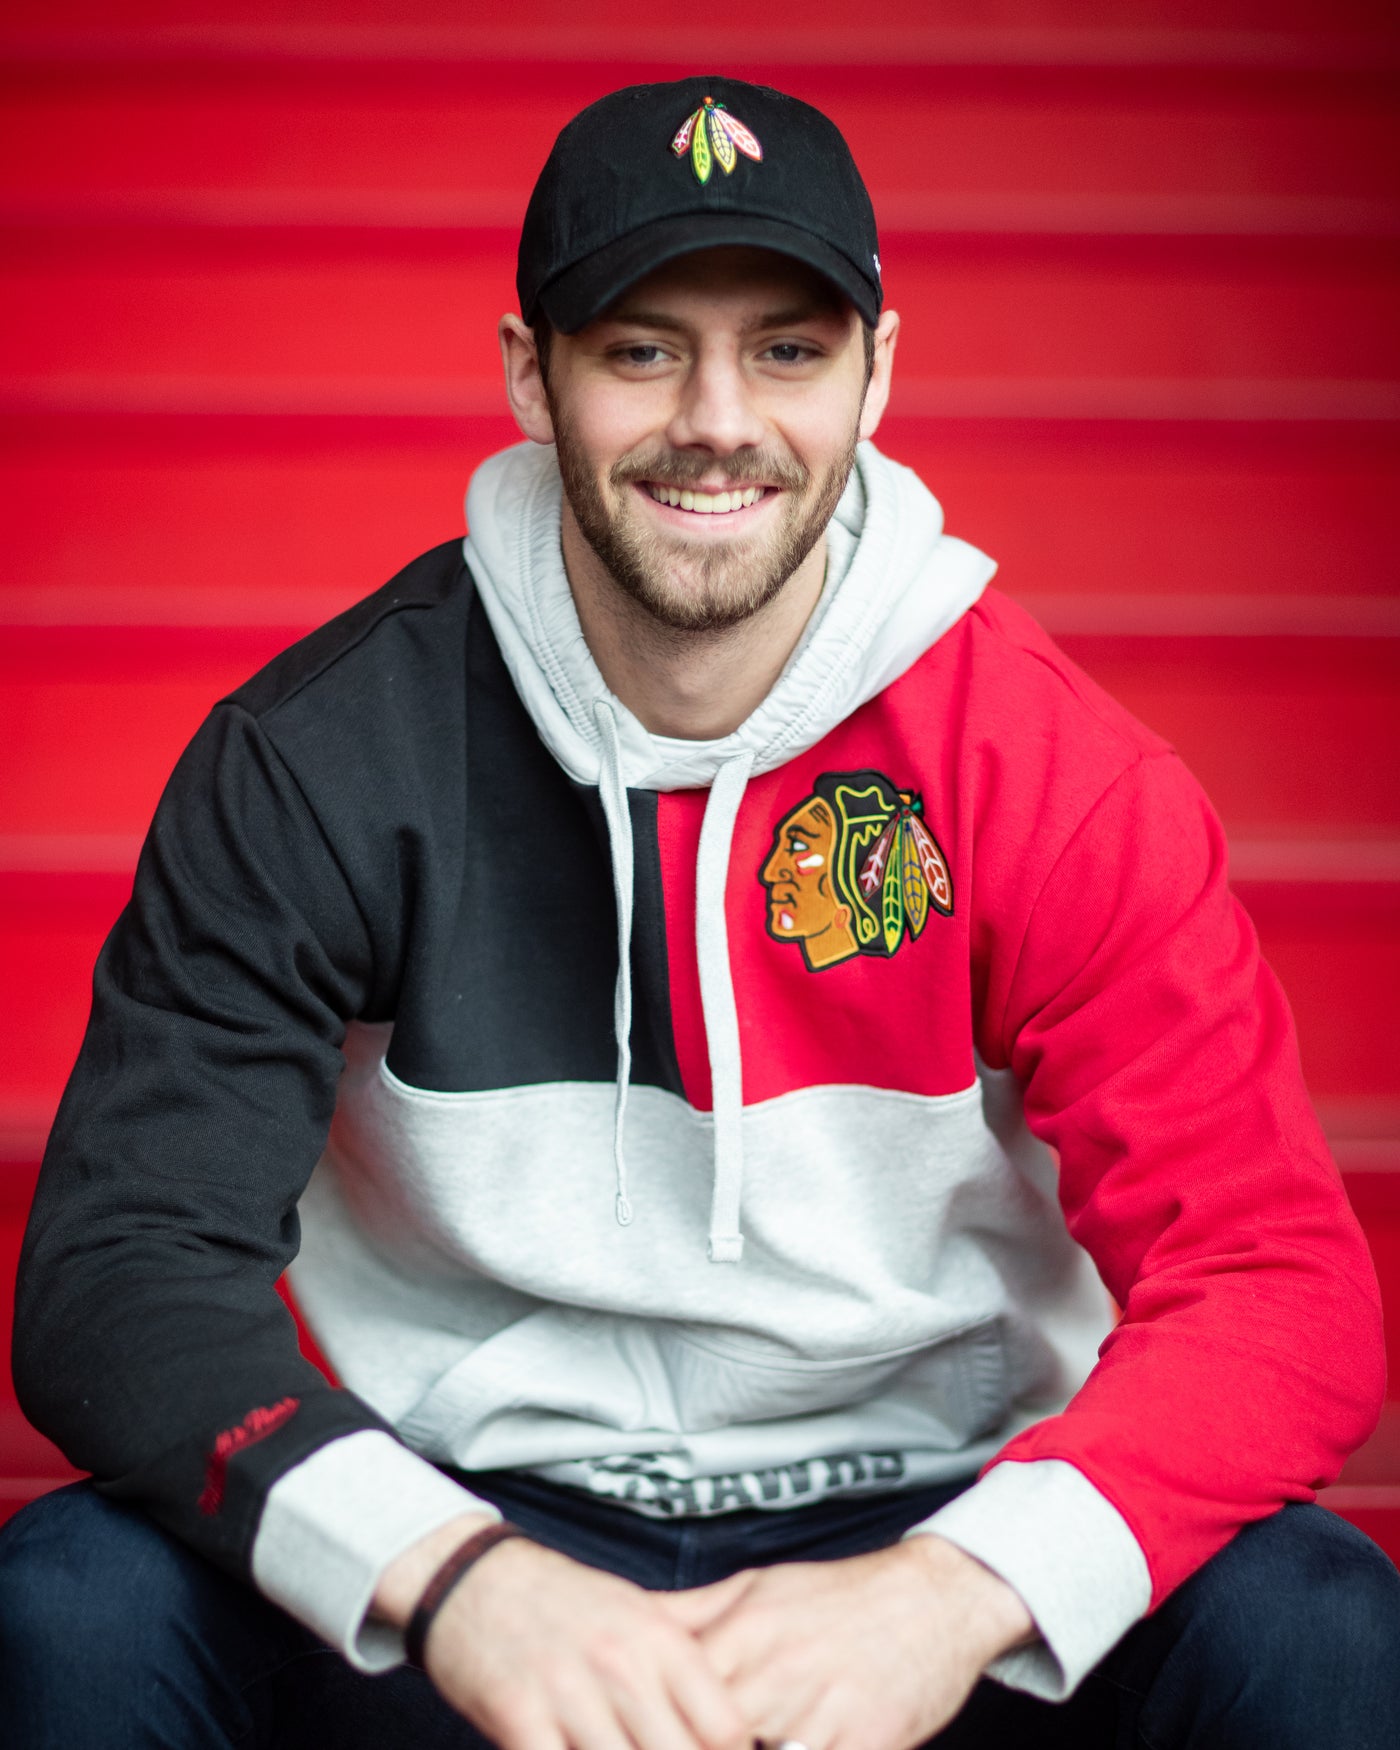 Jason Dickinson in the Mitchell & Ness colorblock tie breaker hoodie with Chicago Blackhawks Primary logo on left chest